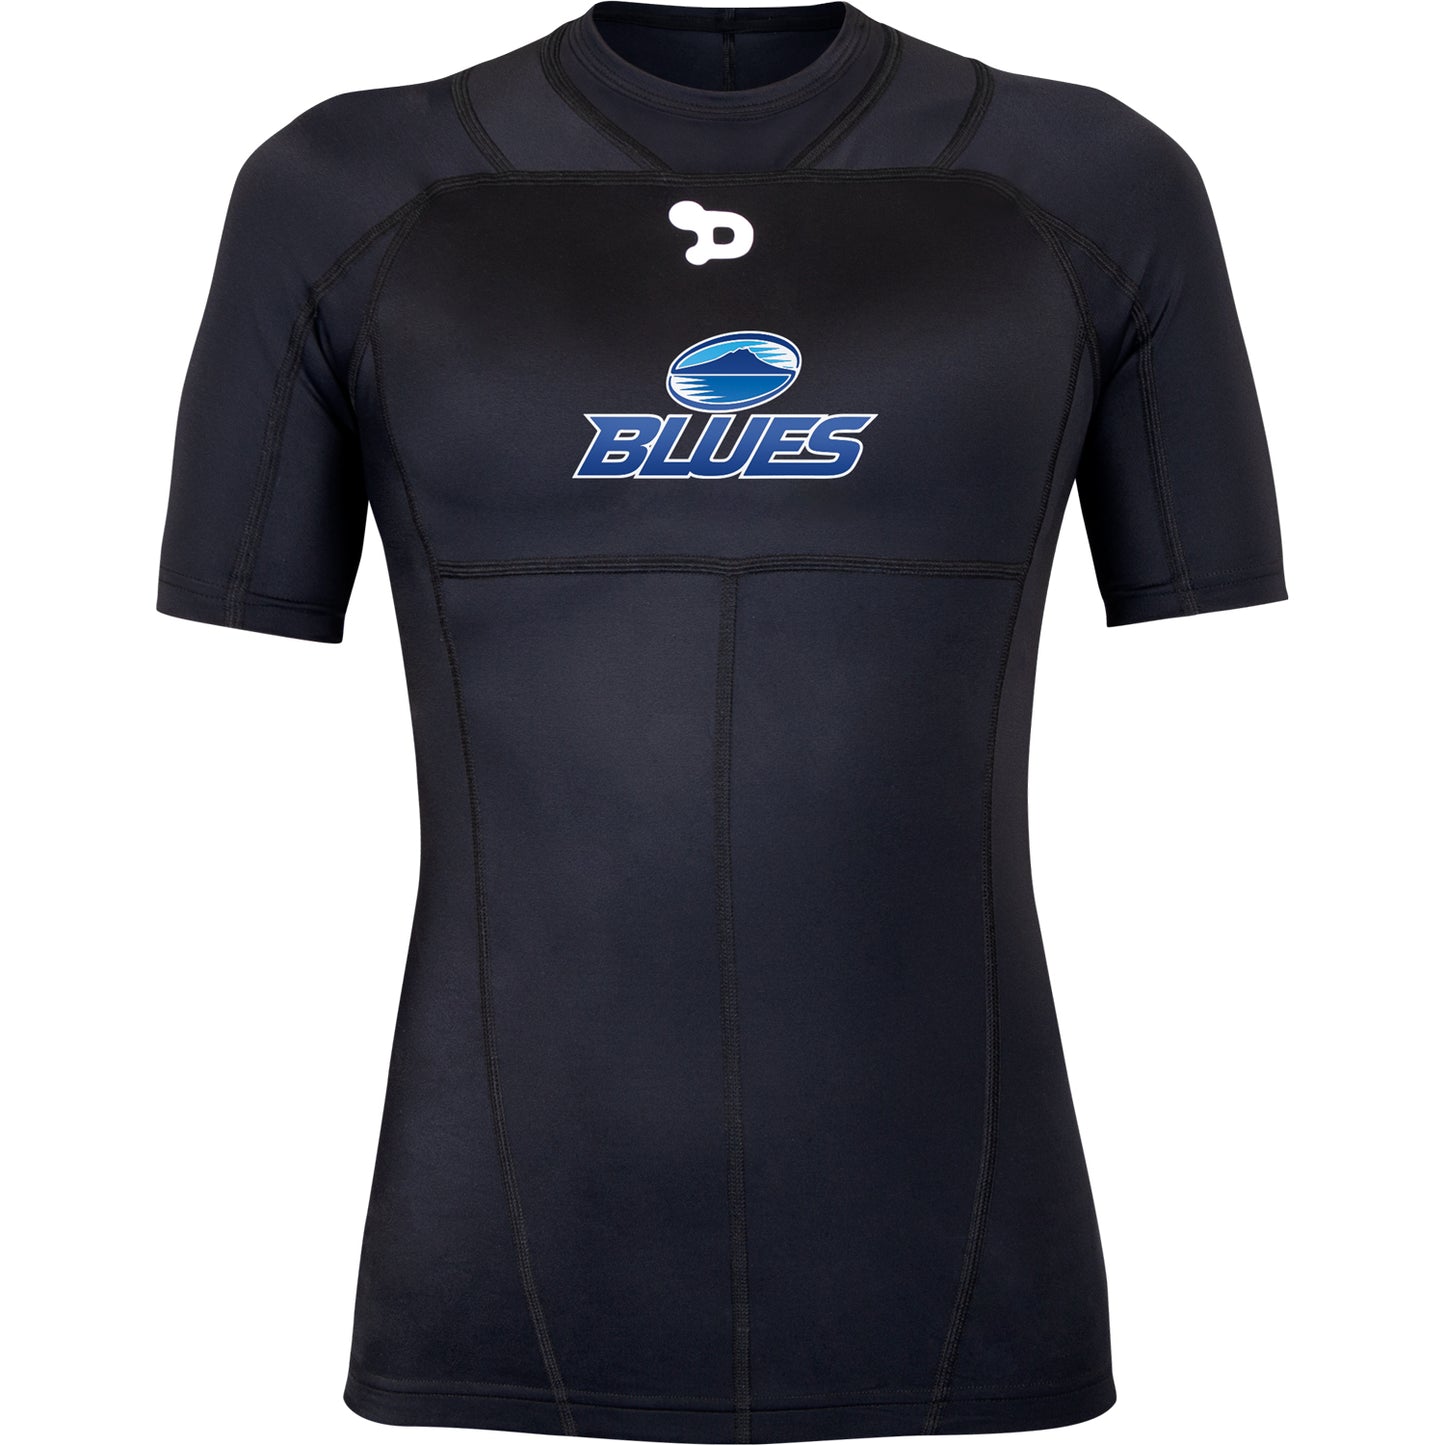 Blues Ladies Compression Top SS